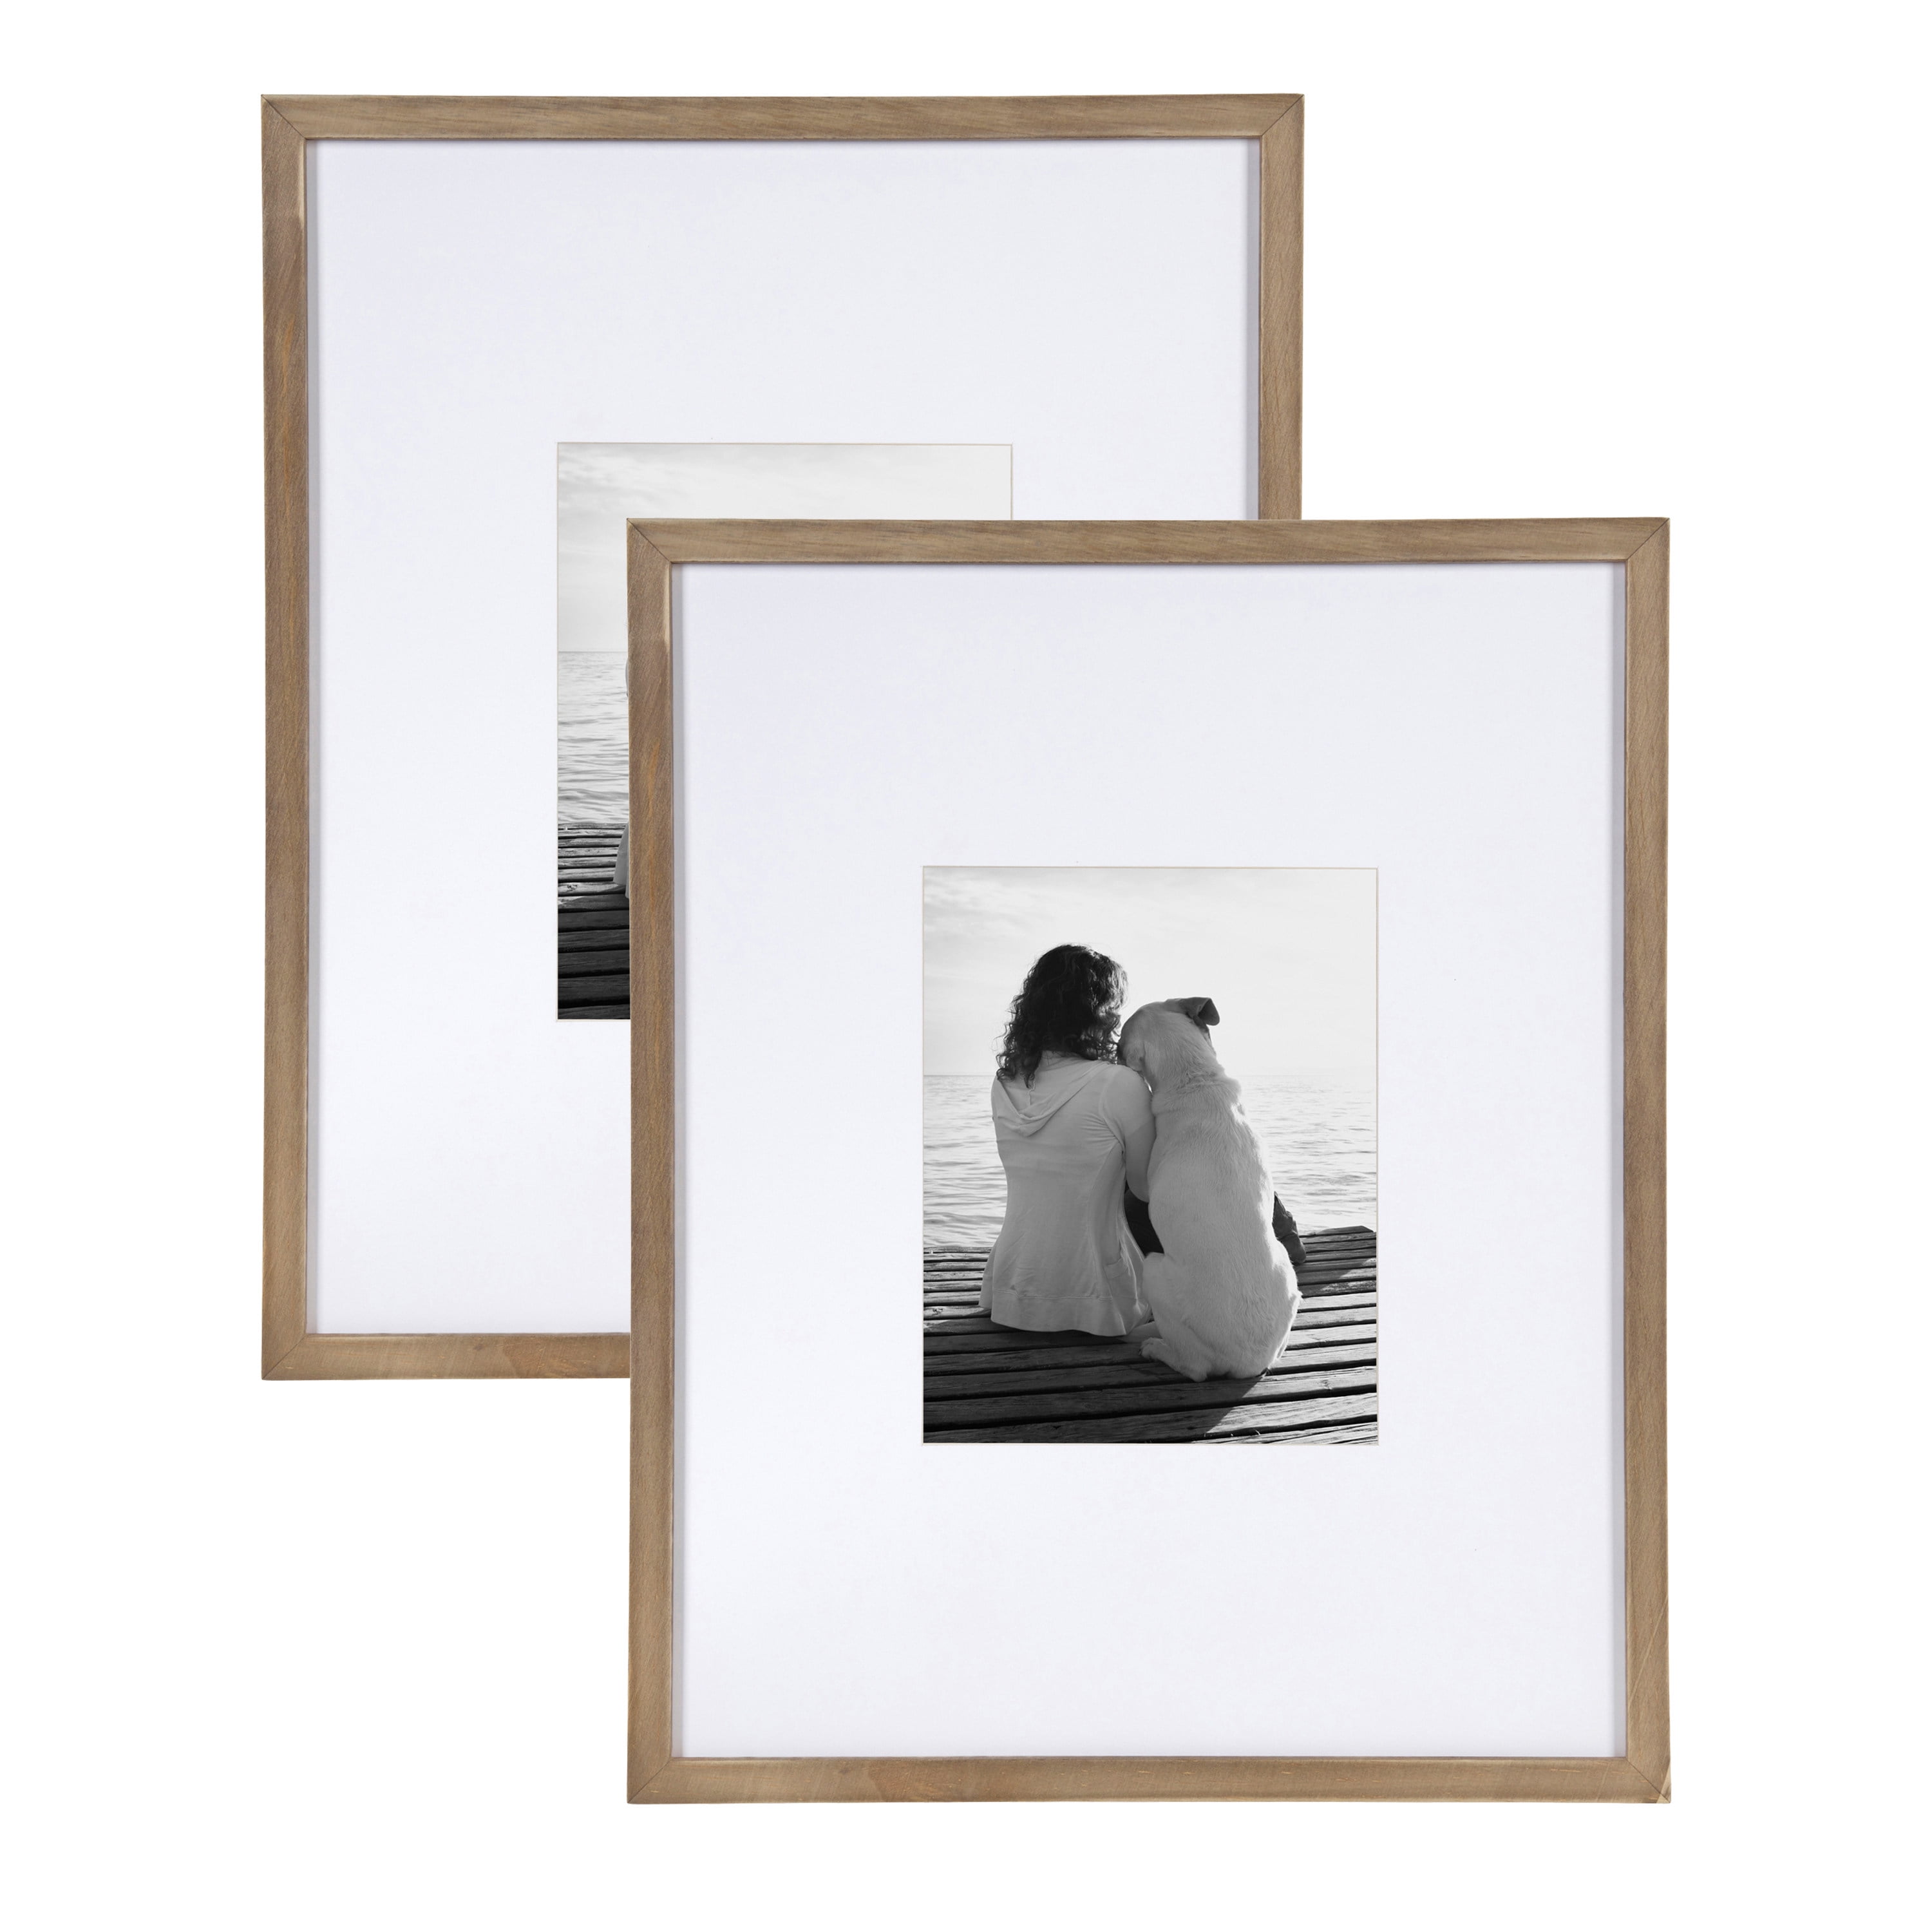 StyleWell 16 x 20 Matted to 8 x 10 White Gallery Wall Picture Frame (Set of 4)